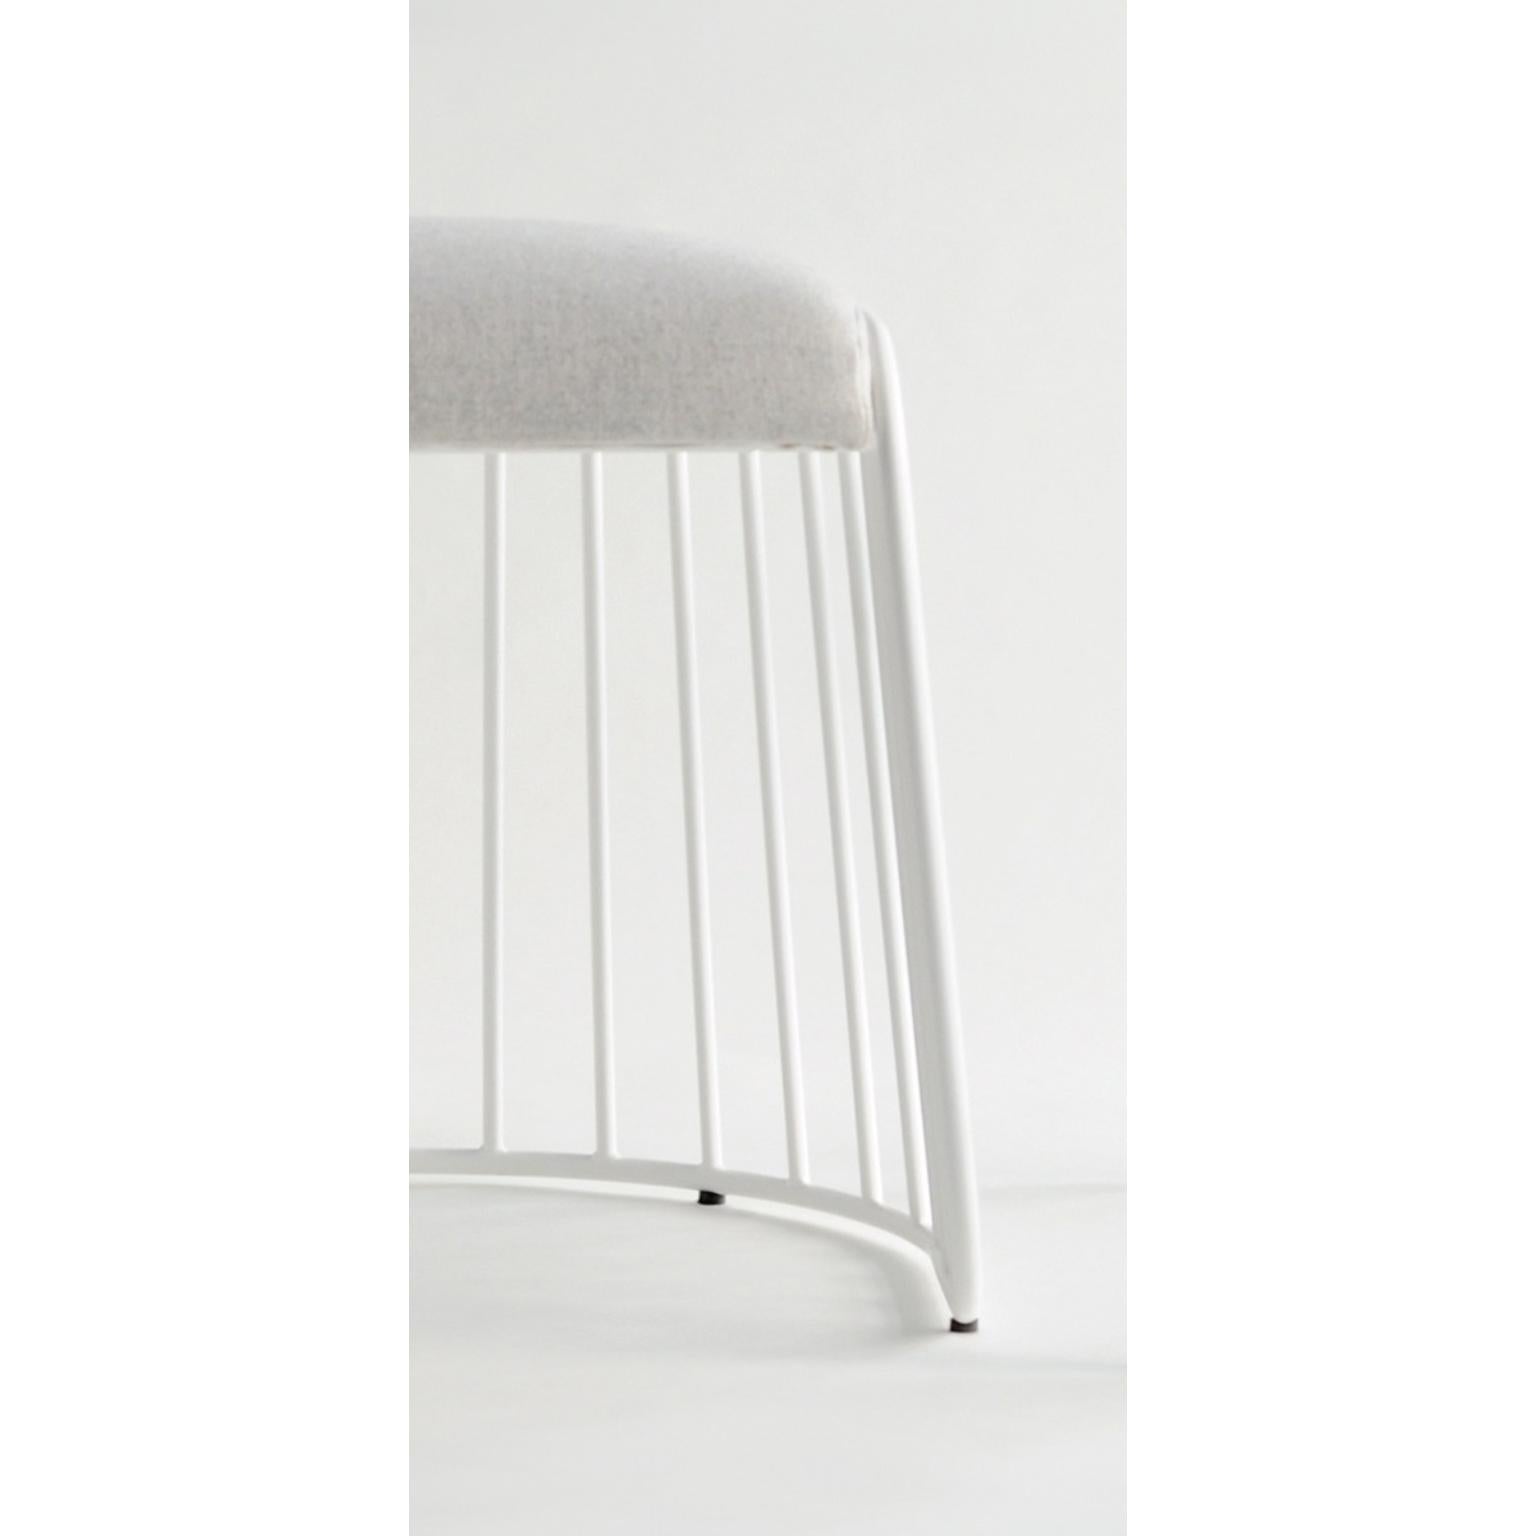 American Bride’s Veil Low Stool by Phase Design For Sale